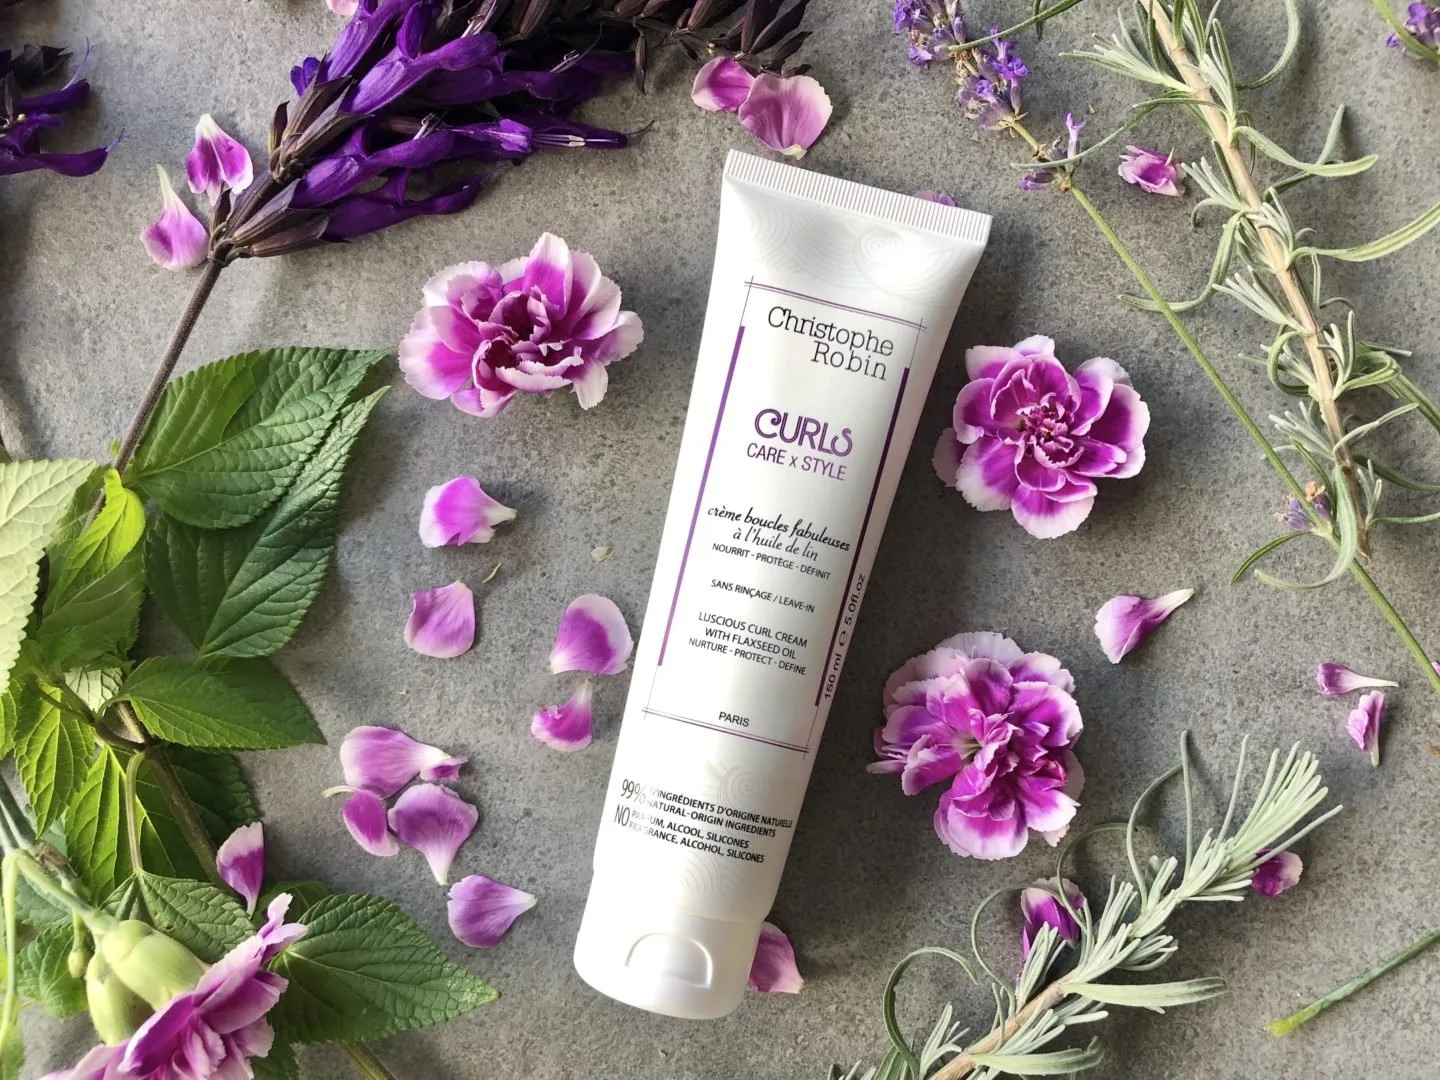 Christophe Robin Curl Cream and products for the Curly Hair